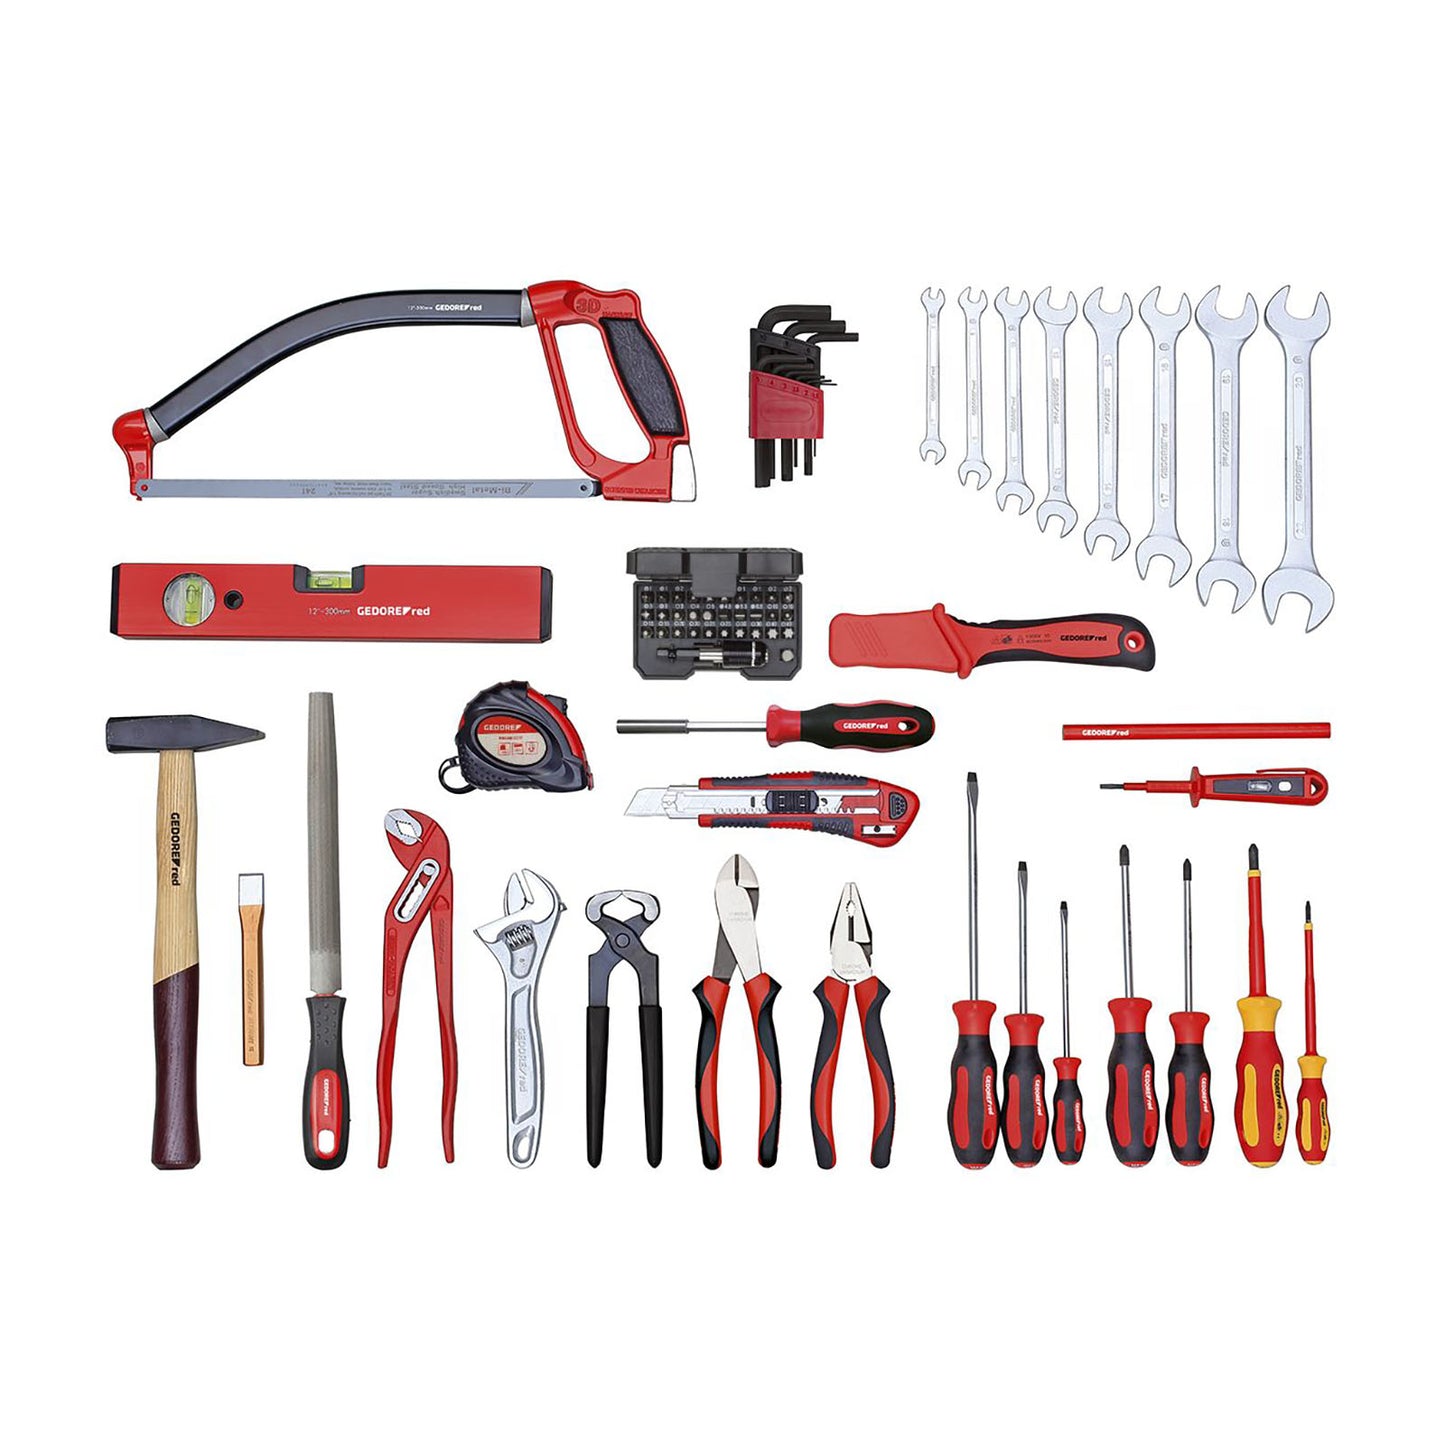 GEDORE red R21000072 - BASIC tool set, 72 pieces (3301627)